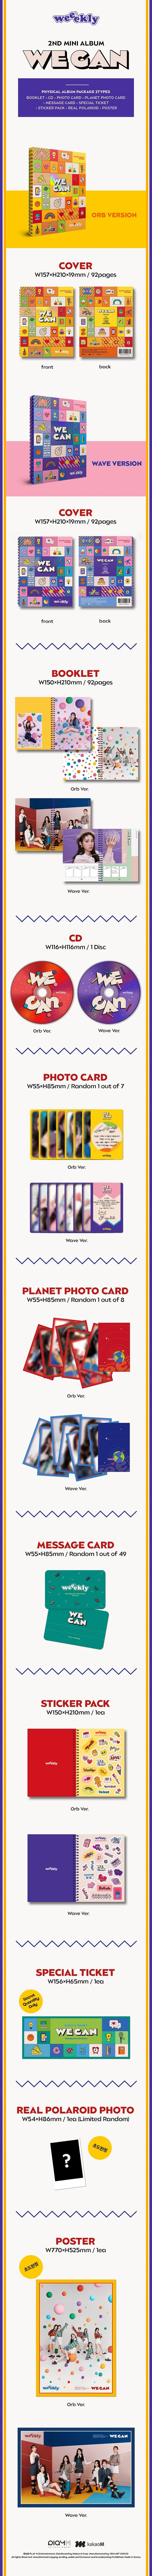 1 CD
1 Booklet (92 pages)
1 Photo Card
1 Planet Card
1 Message Card
1 Sticker Pack